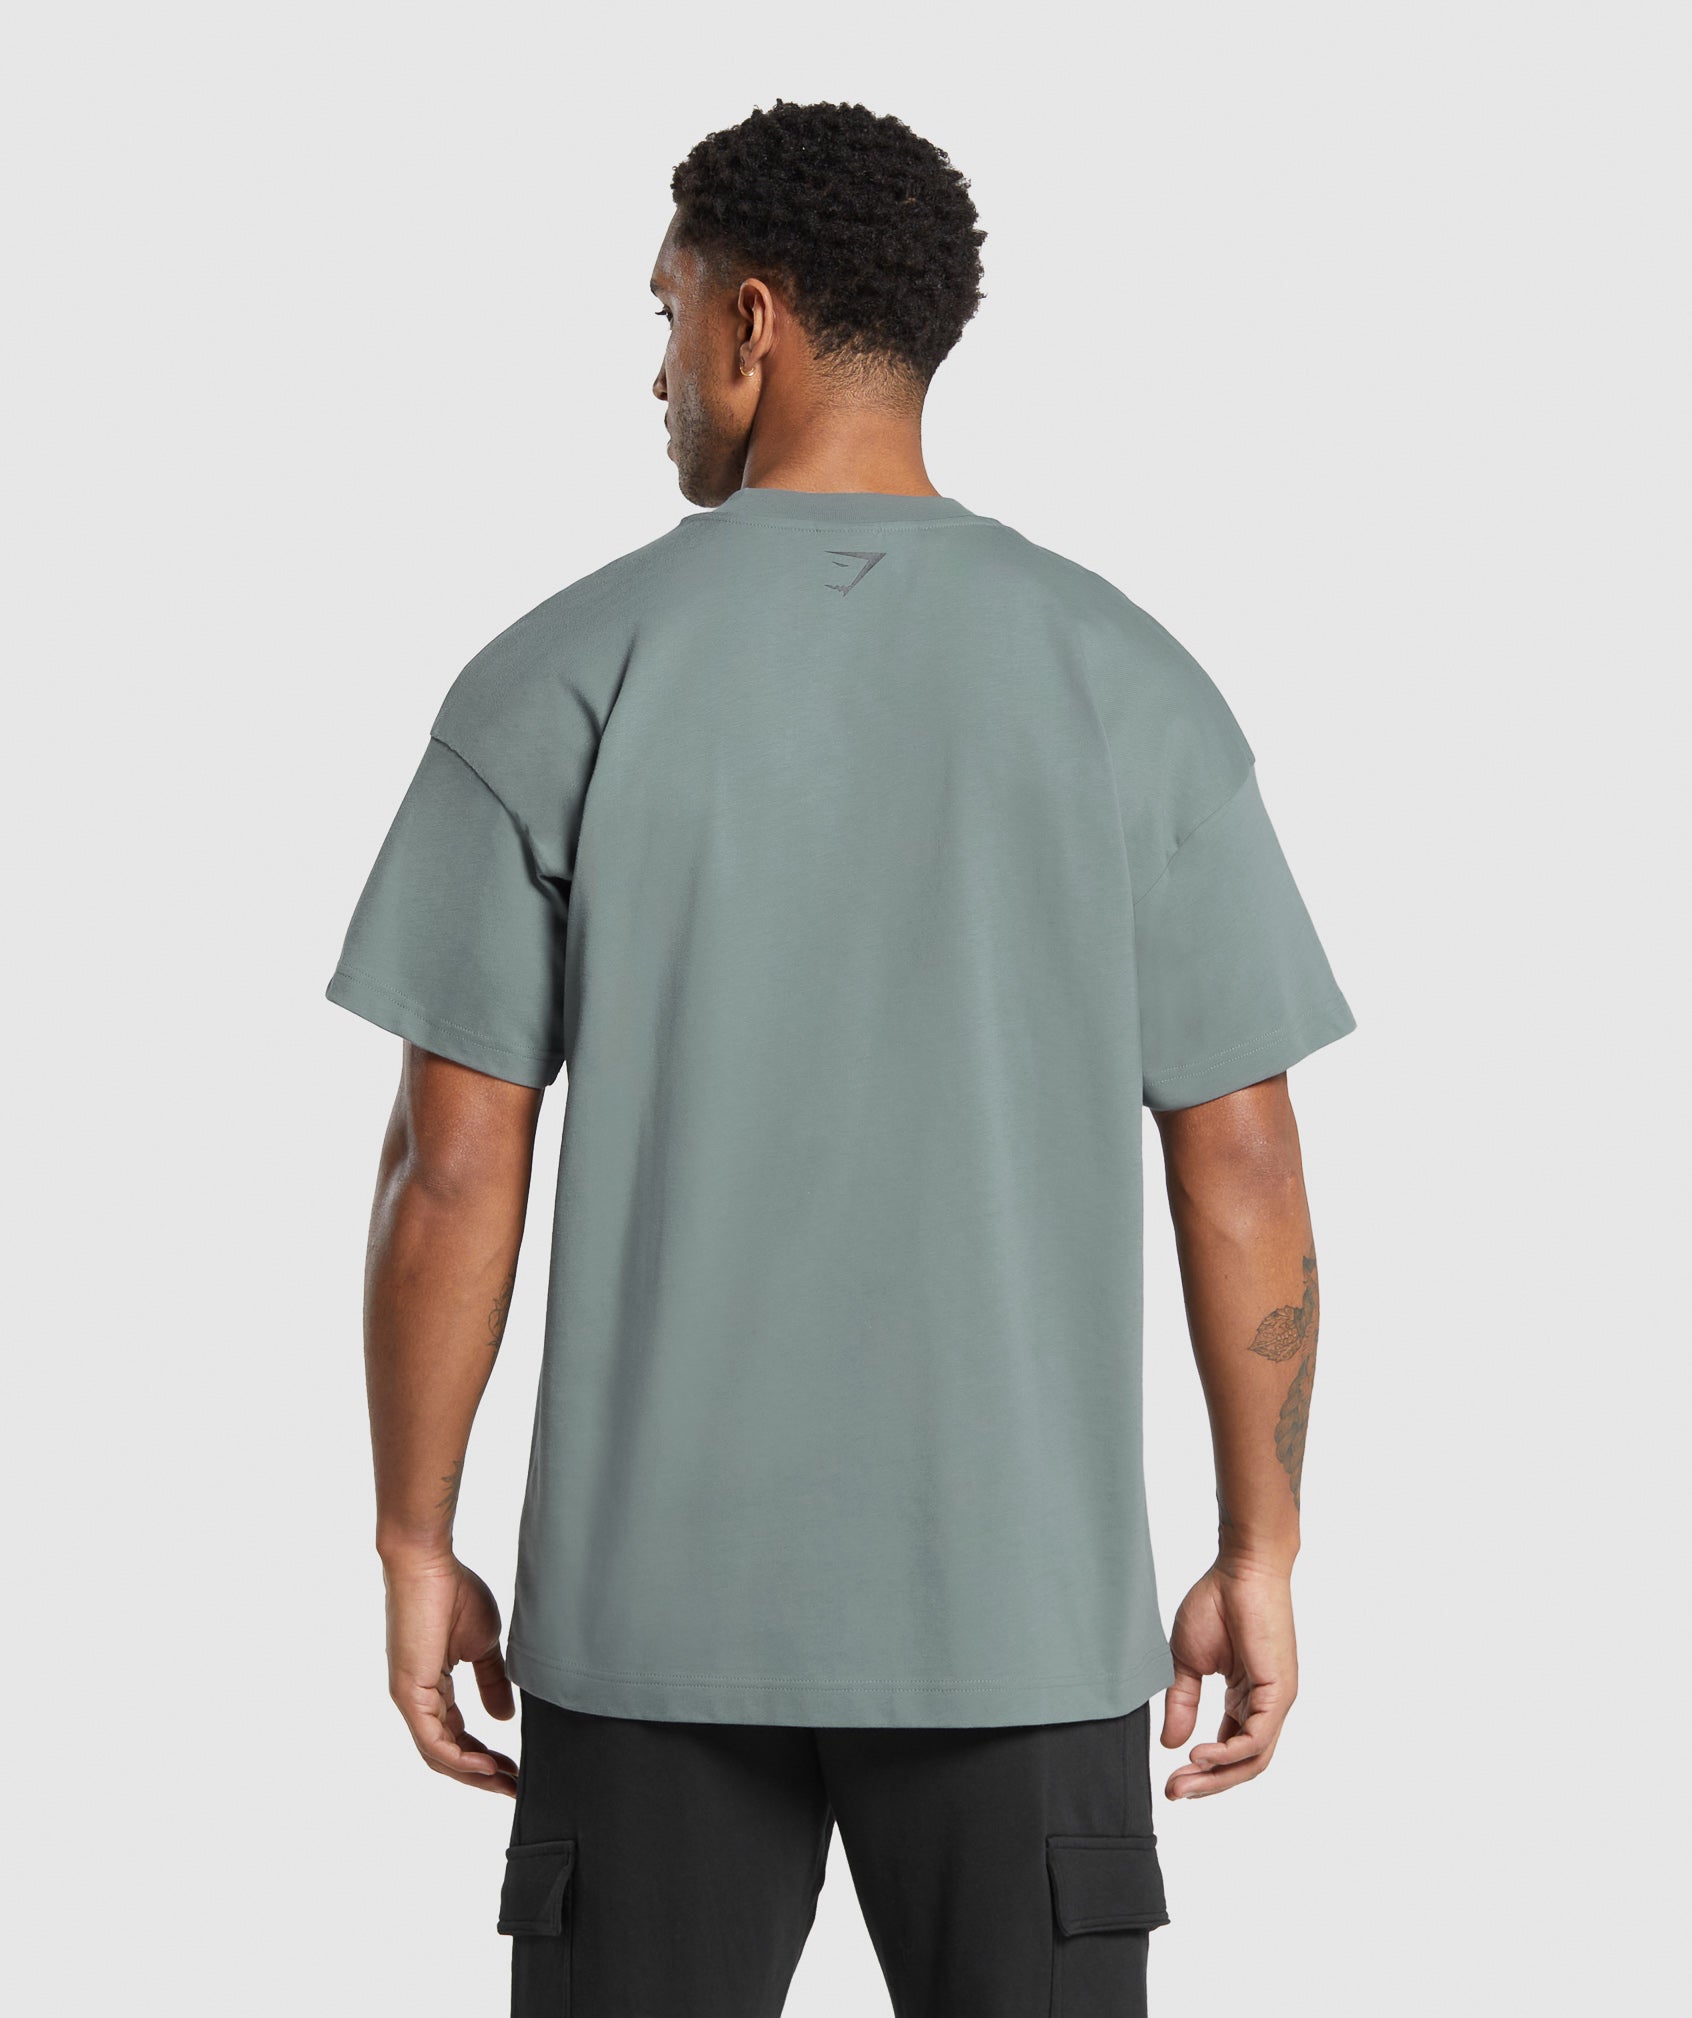 Conditioning Graphic T-Shirt in Cargo Teal - view 2